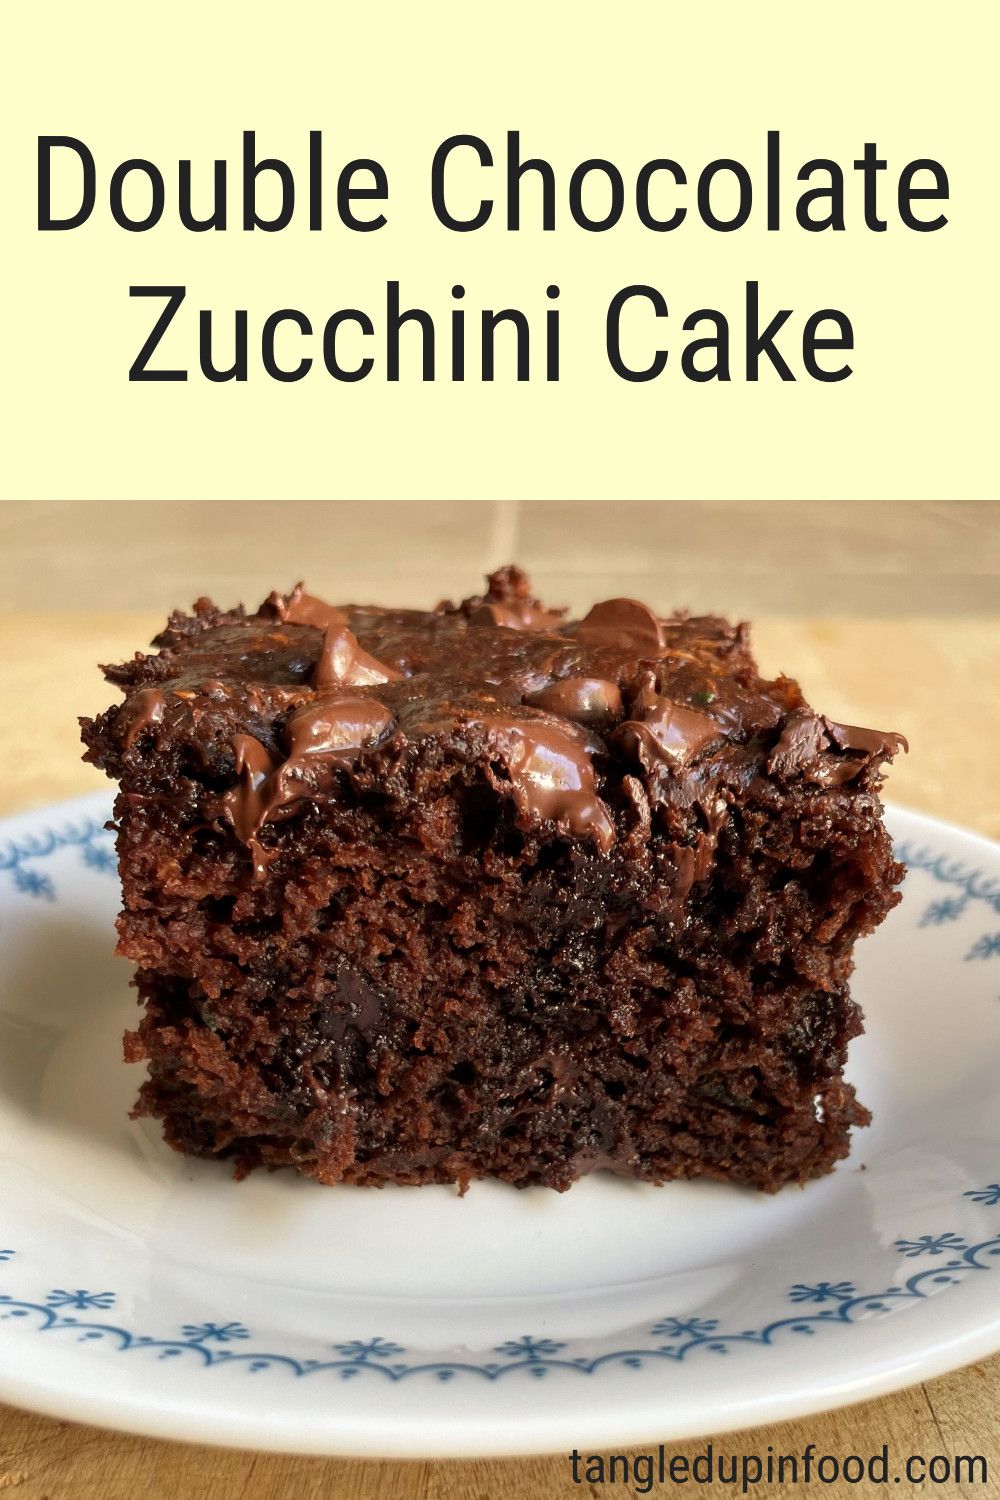 Piece of chocolate cake on plate with text reading "Double Chocolate Zucchini Cake"